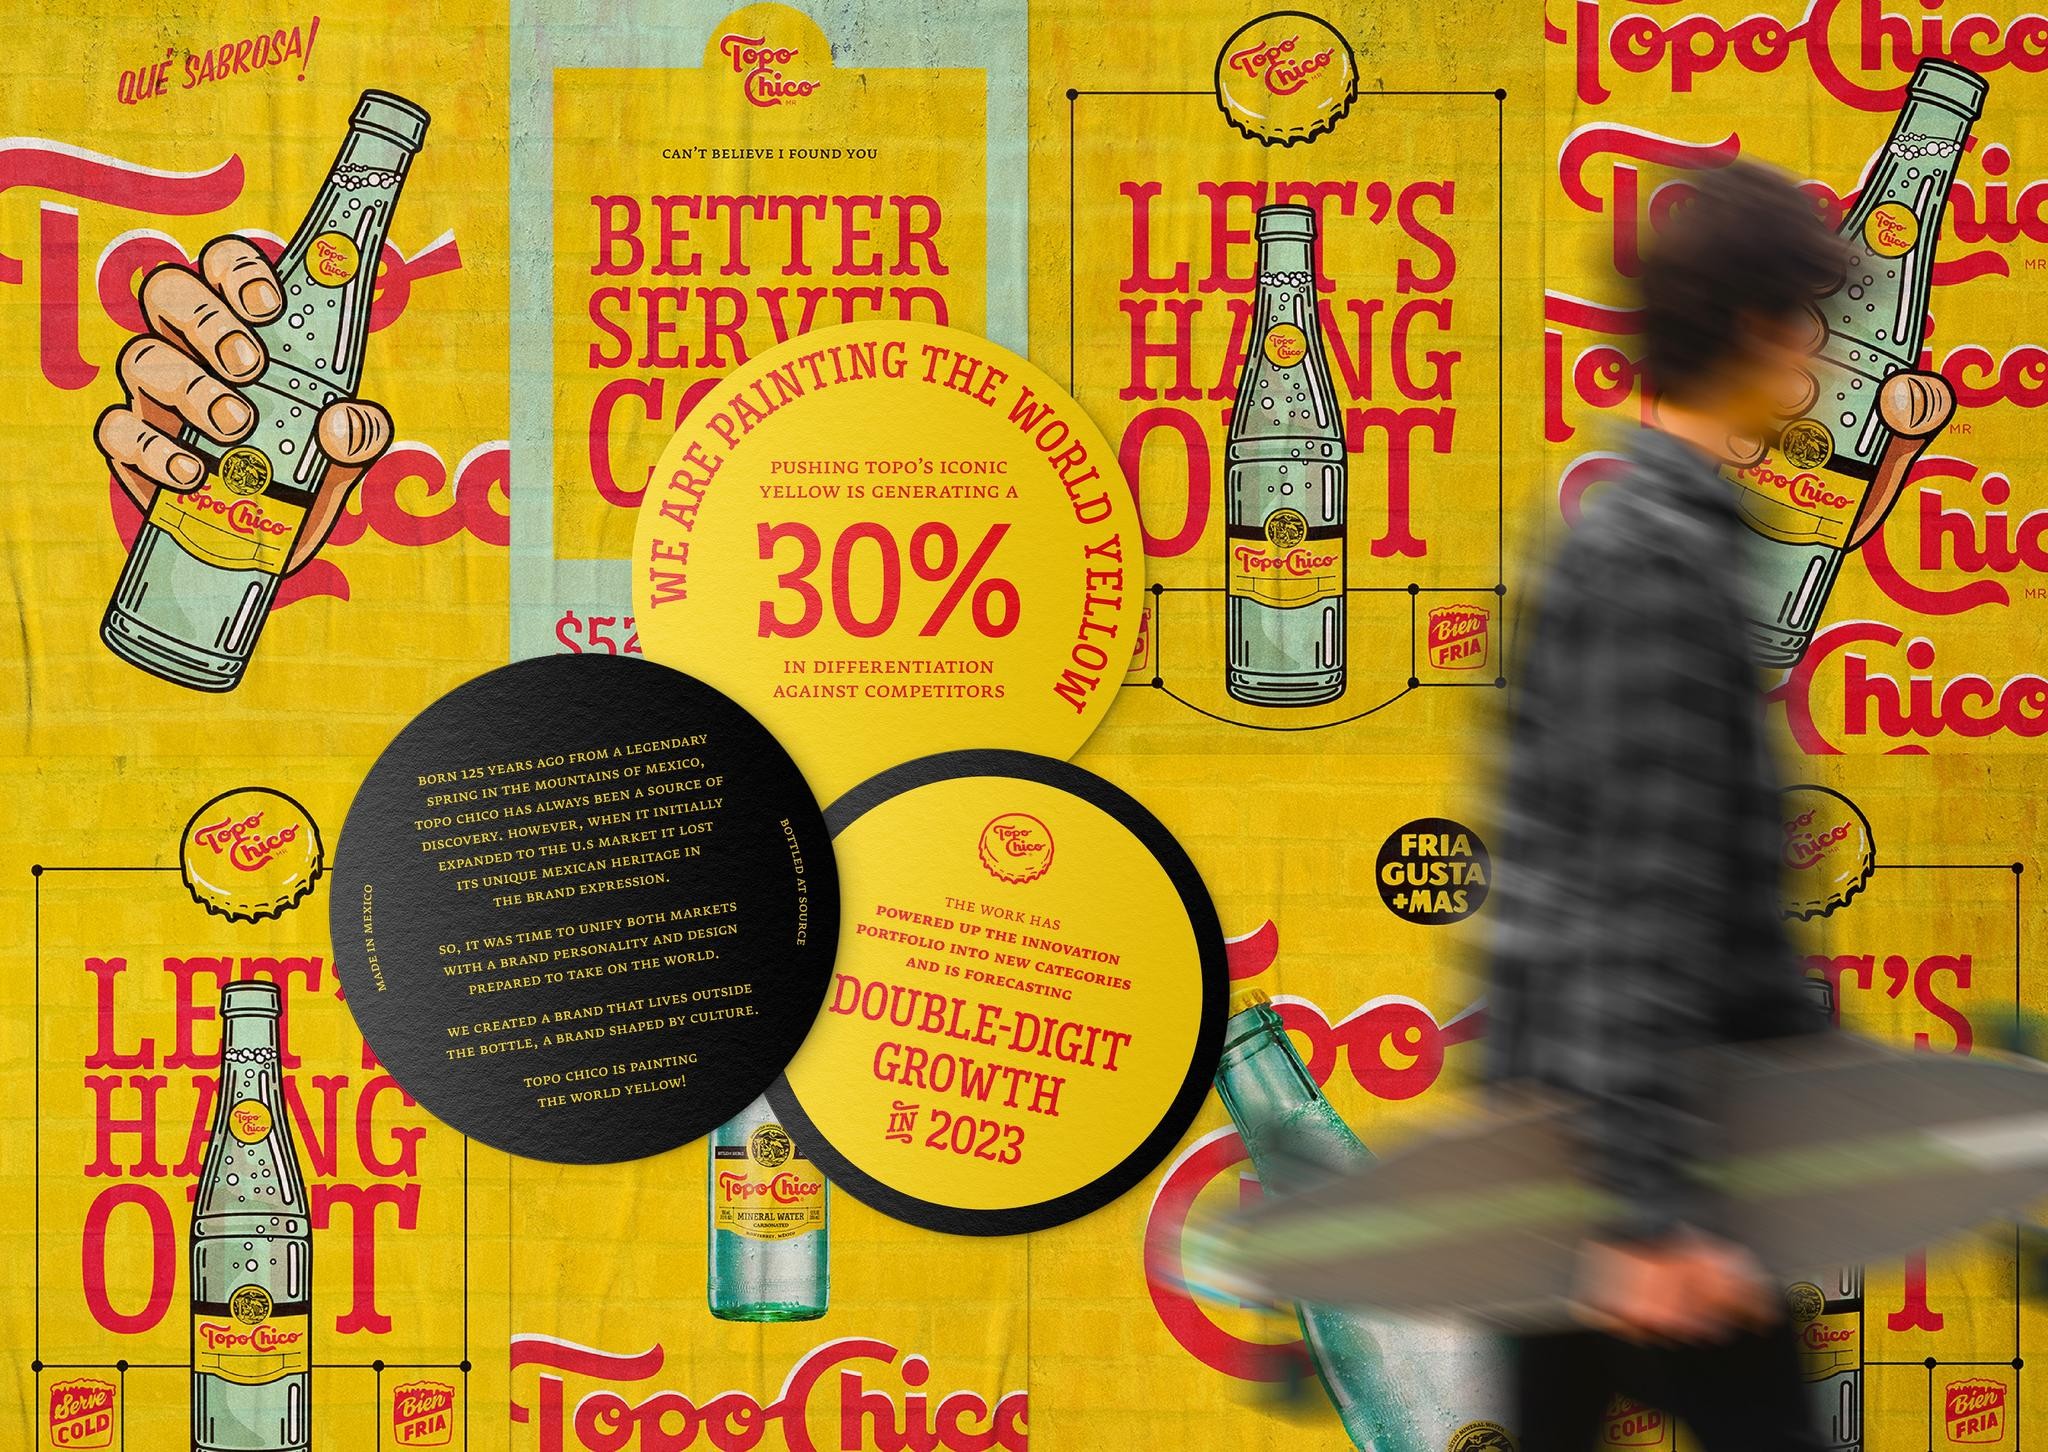 TOPO CHICO: A SOURCE OF DISCOVERY